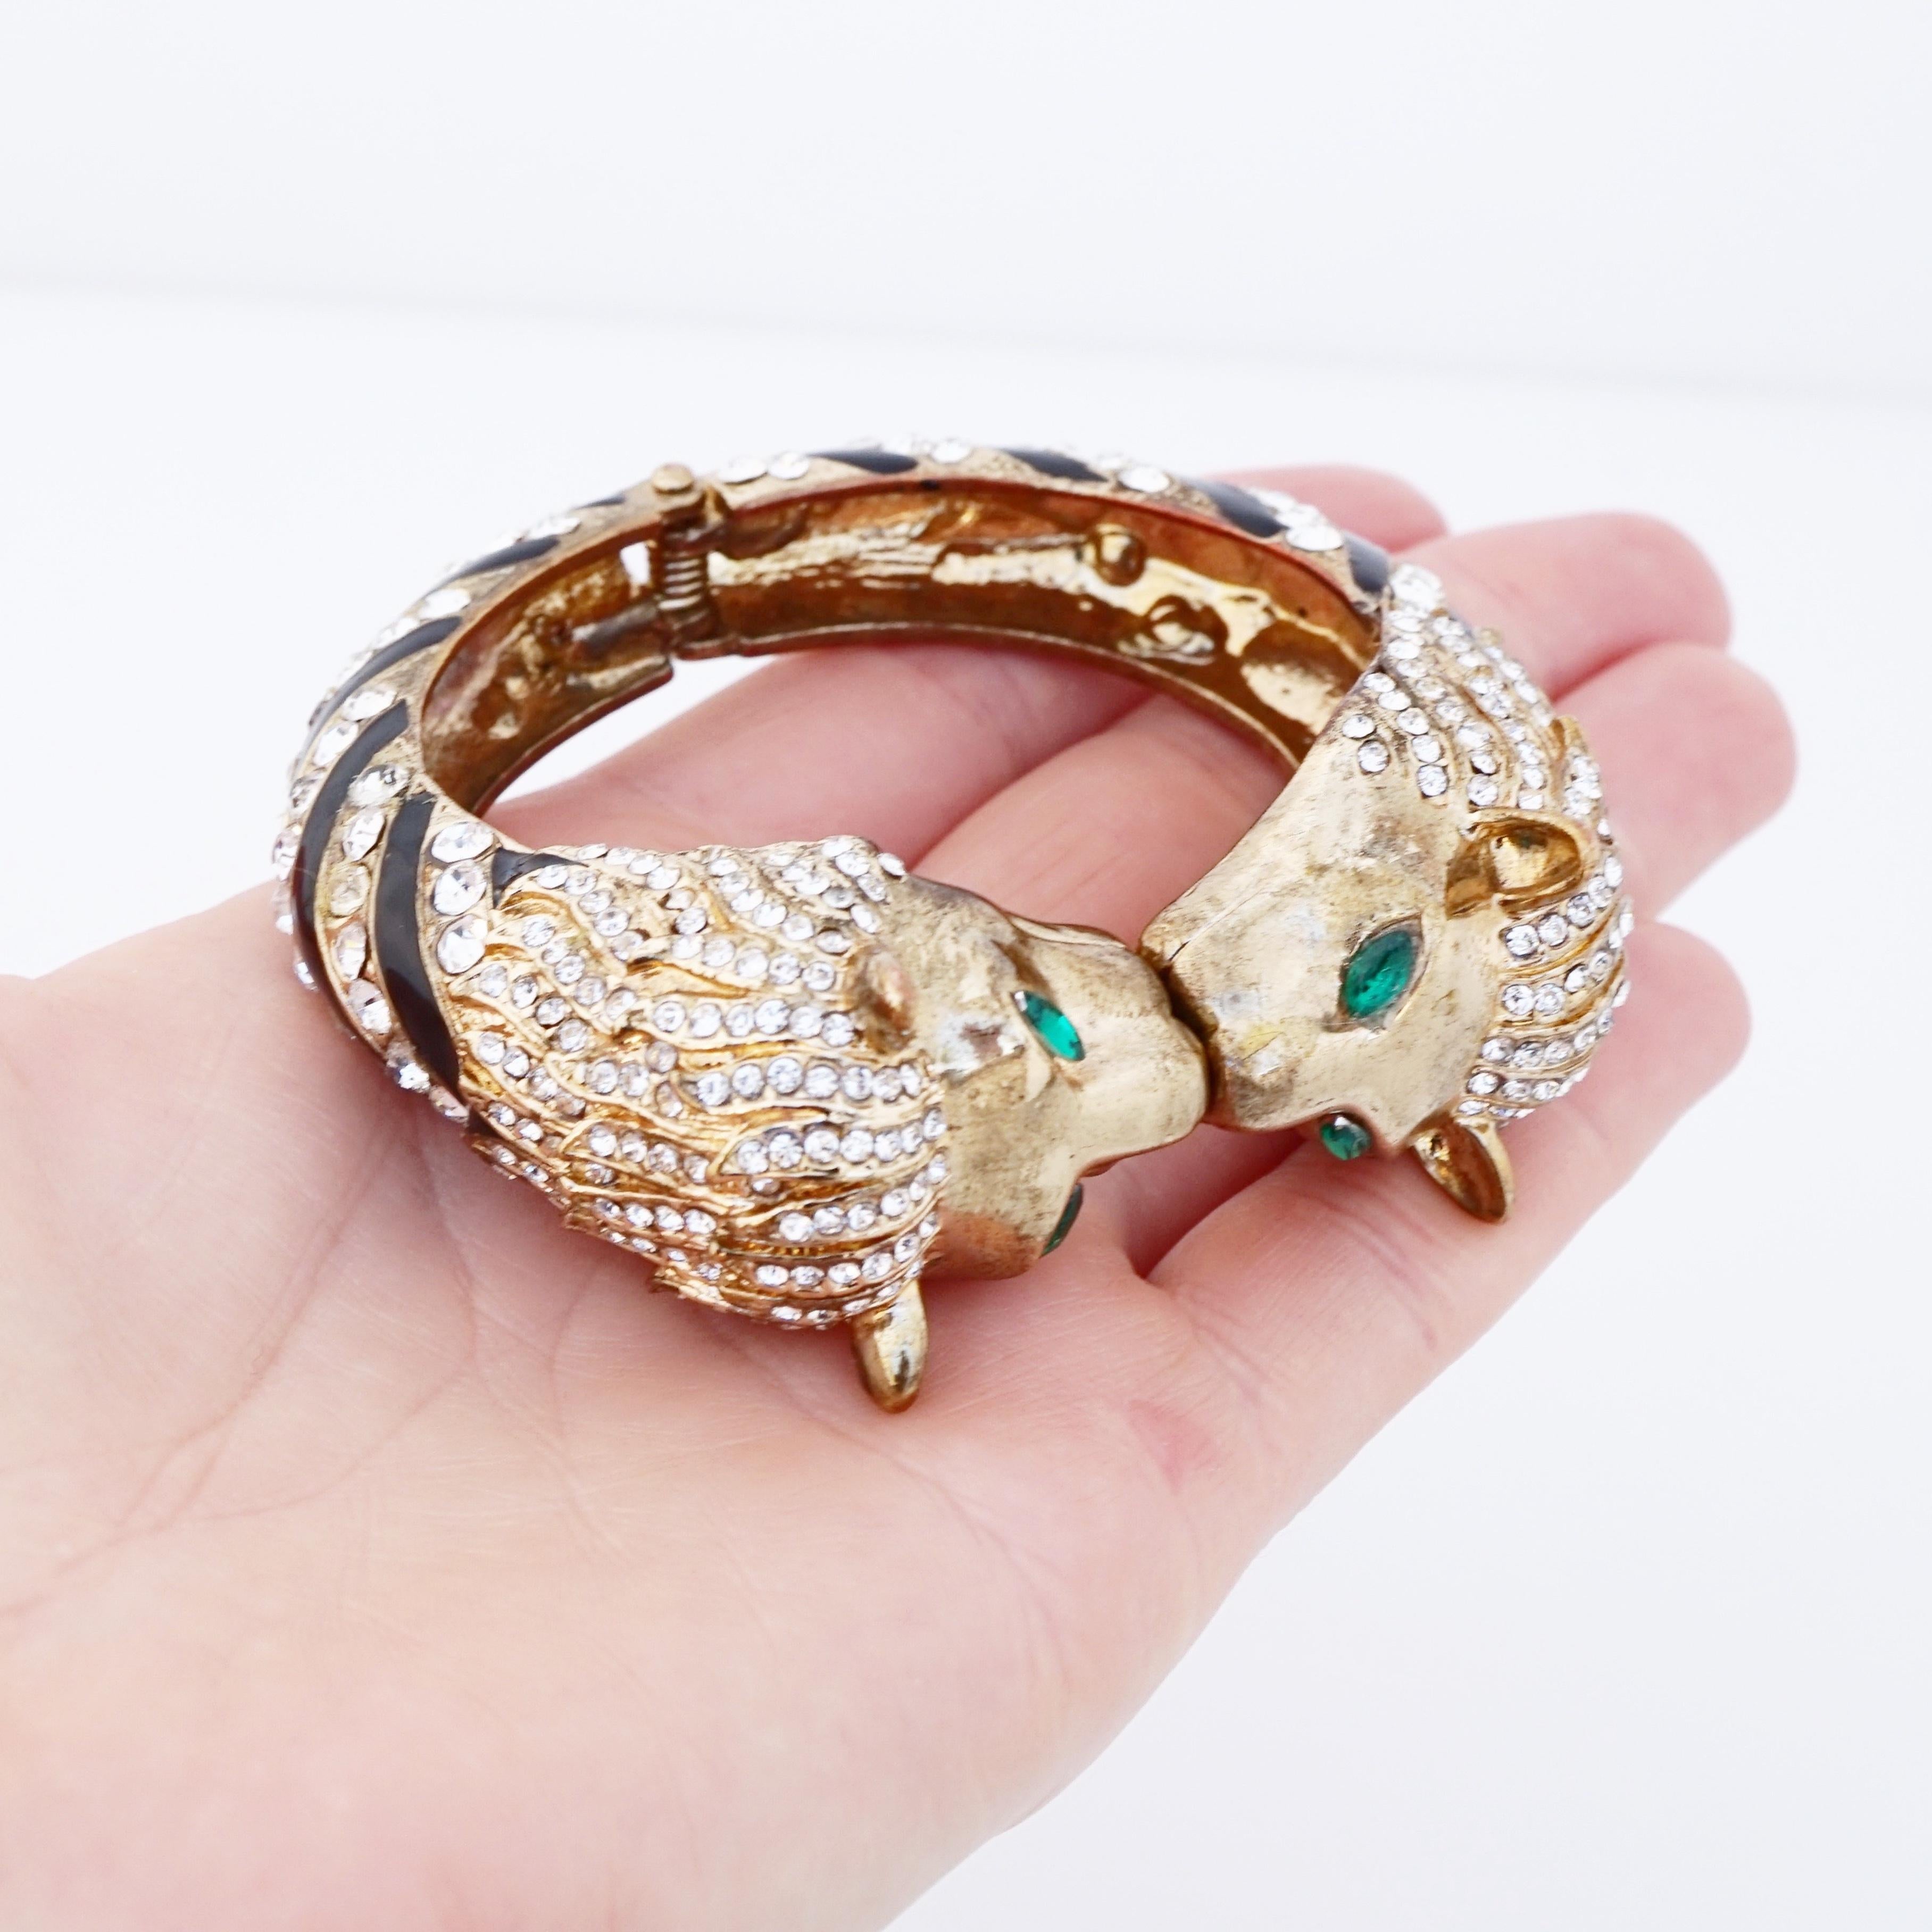 Modern Gilded Double Lion Head Hinged Bangle Bracelet By Kenneth Jay Lane, 1960s